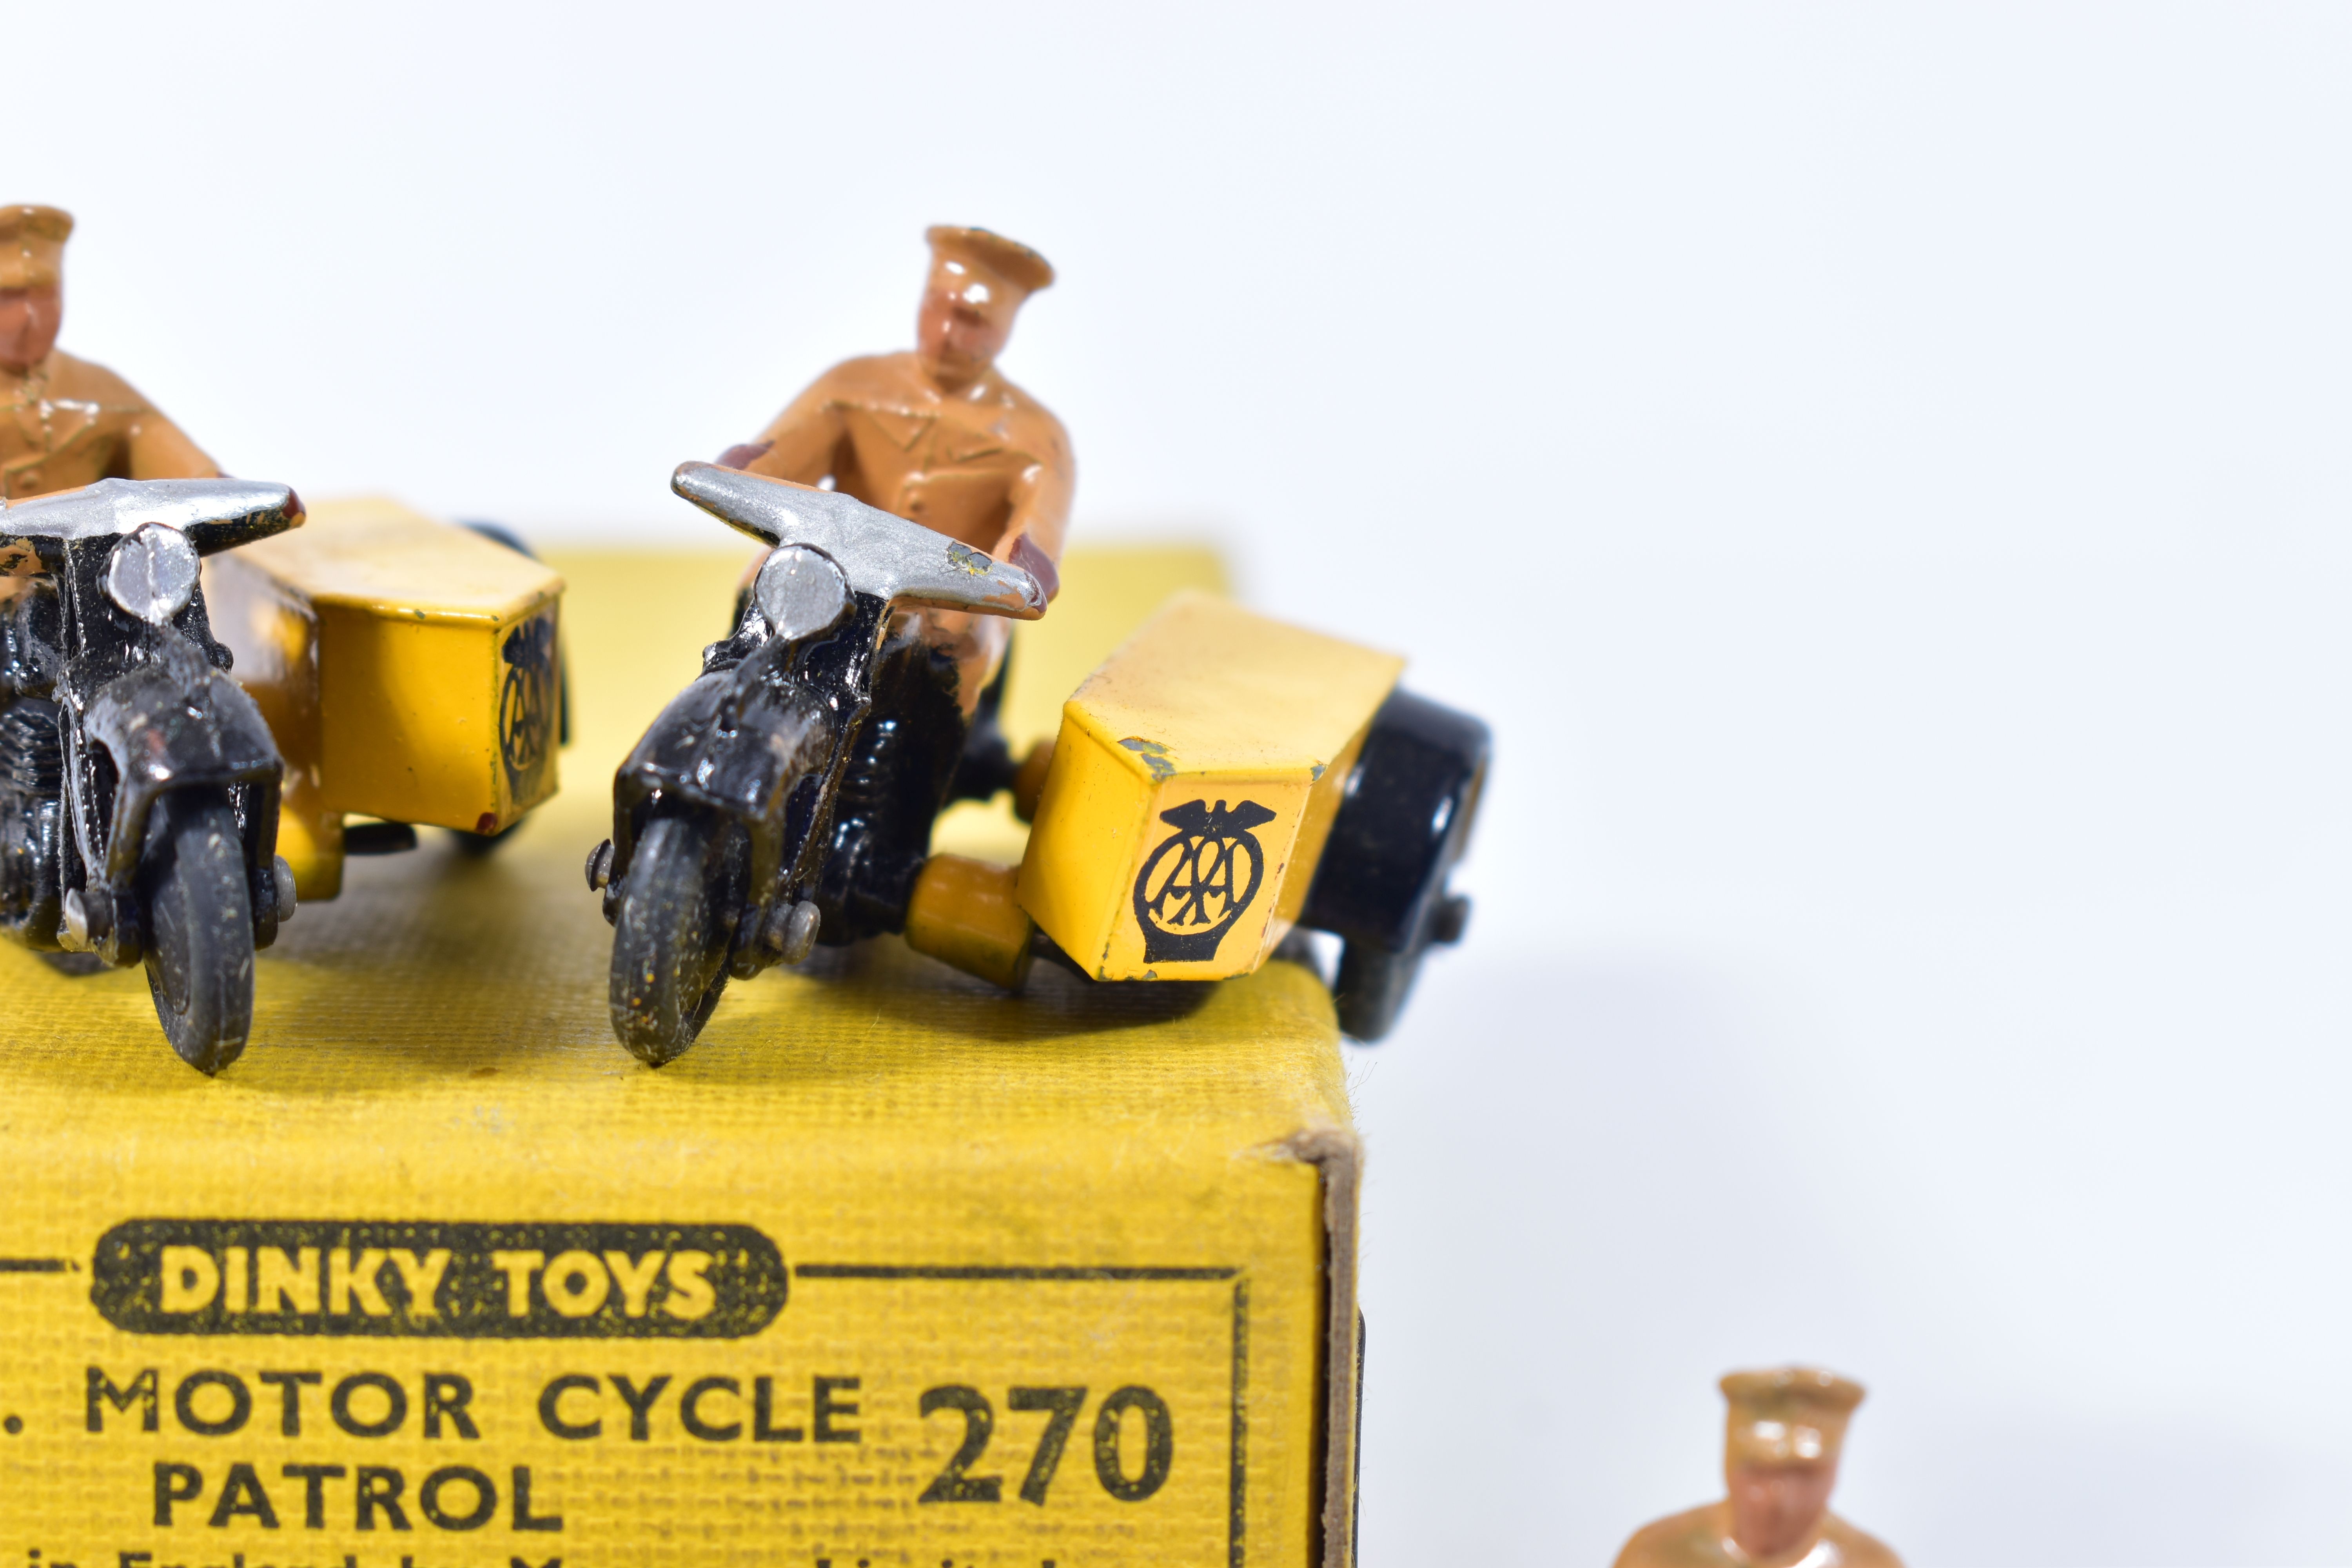 A DINKY TOYS TRADE BOX OF SIX A.A. MOTORCYCLE PATROL, No.270, complete with all six models in - Bild 3 aus 4